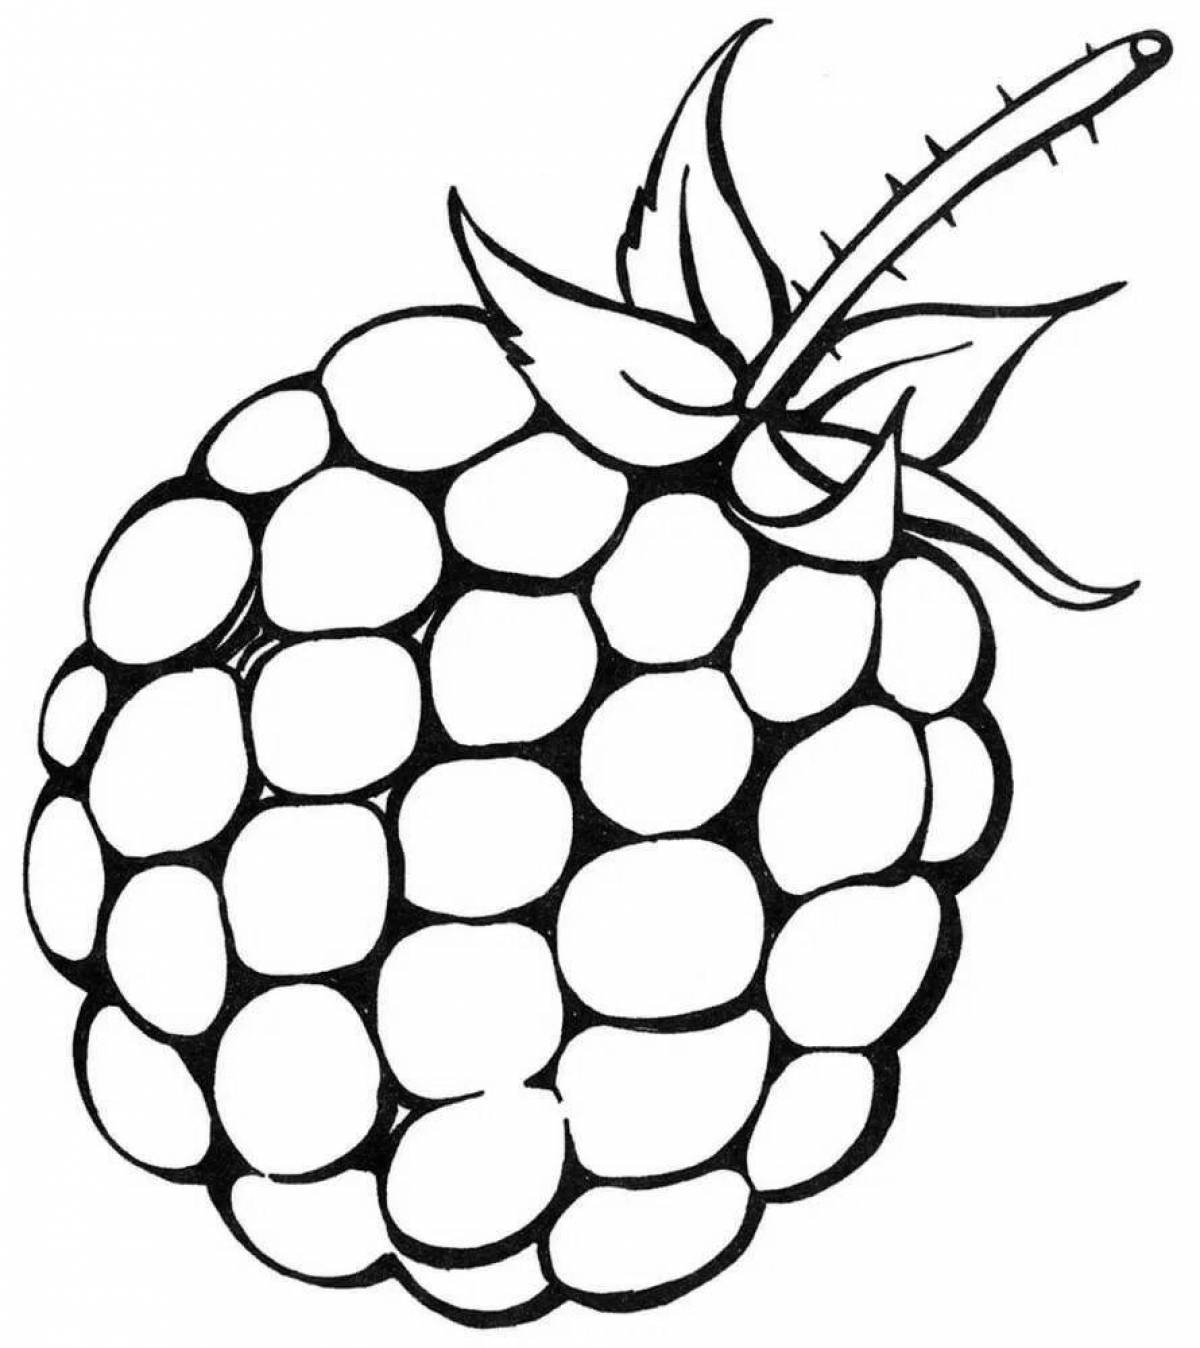 Amazing blackberry coloring pages for kids